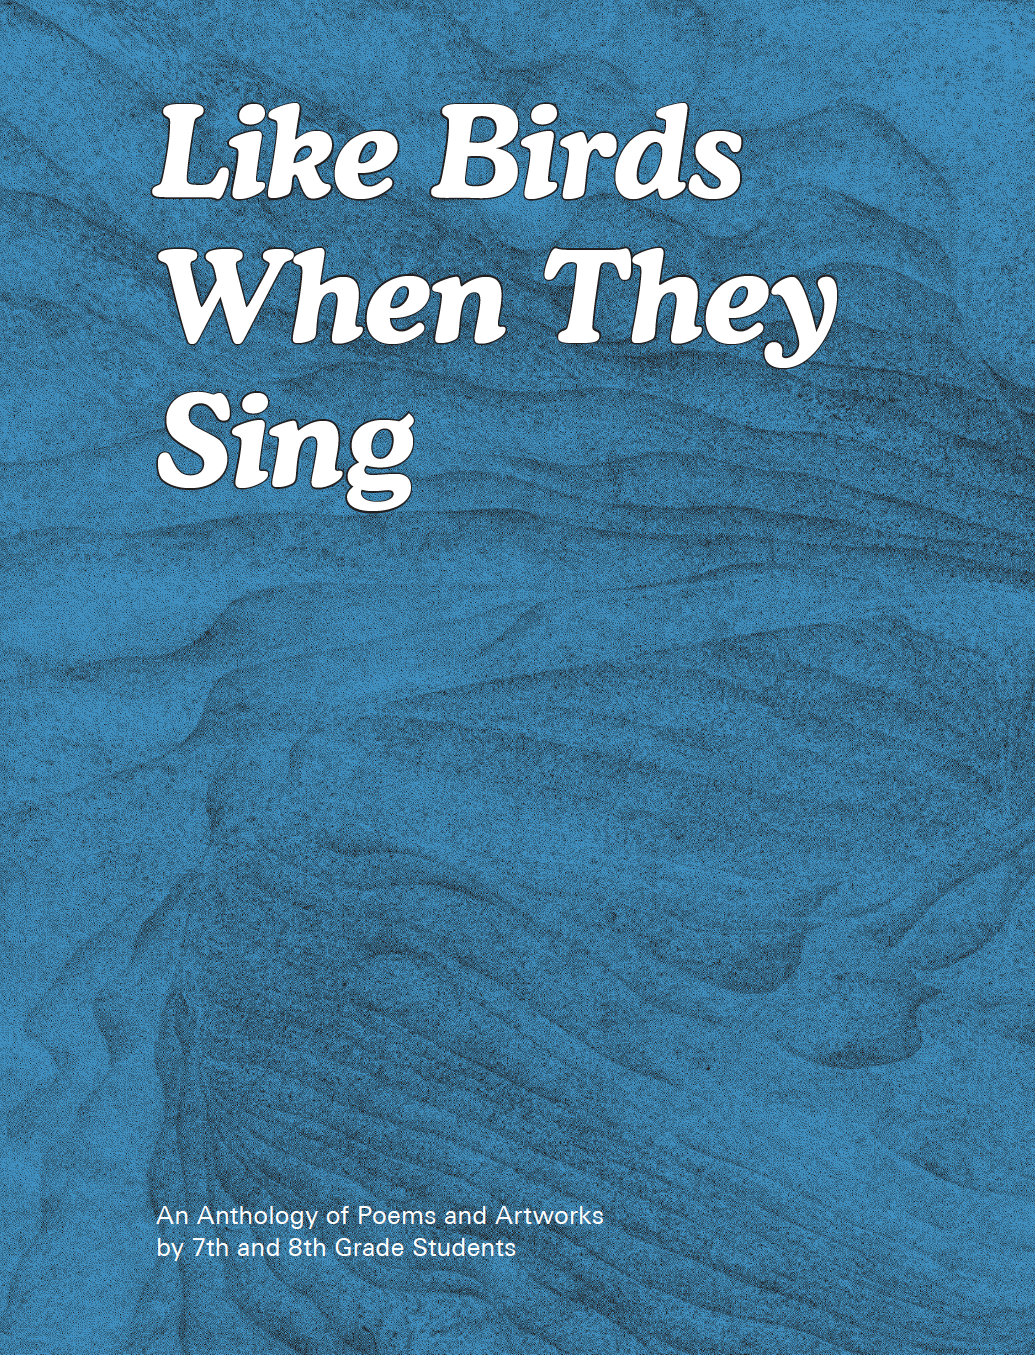 A textured blue book cover, with white text, stating "Like Birds When They Sing - An Anthology of Poems and Artworks by 7th and 8th Grade Students"